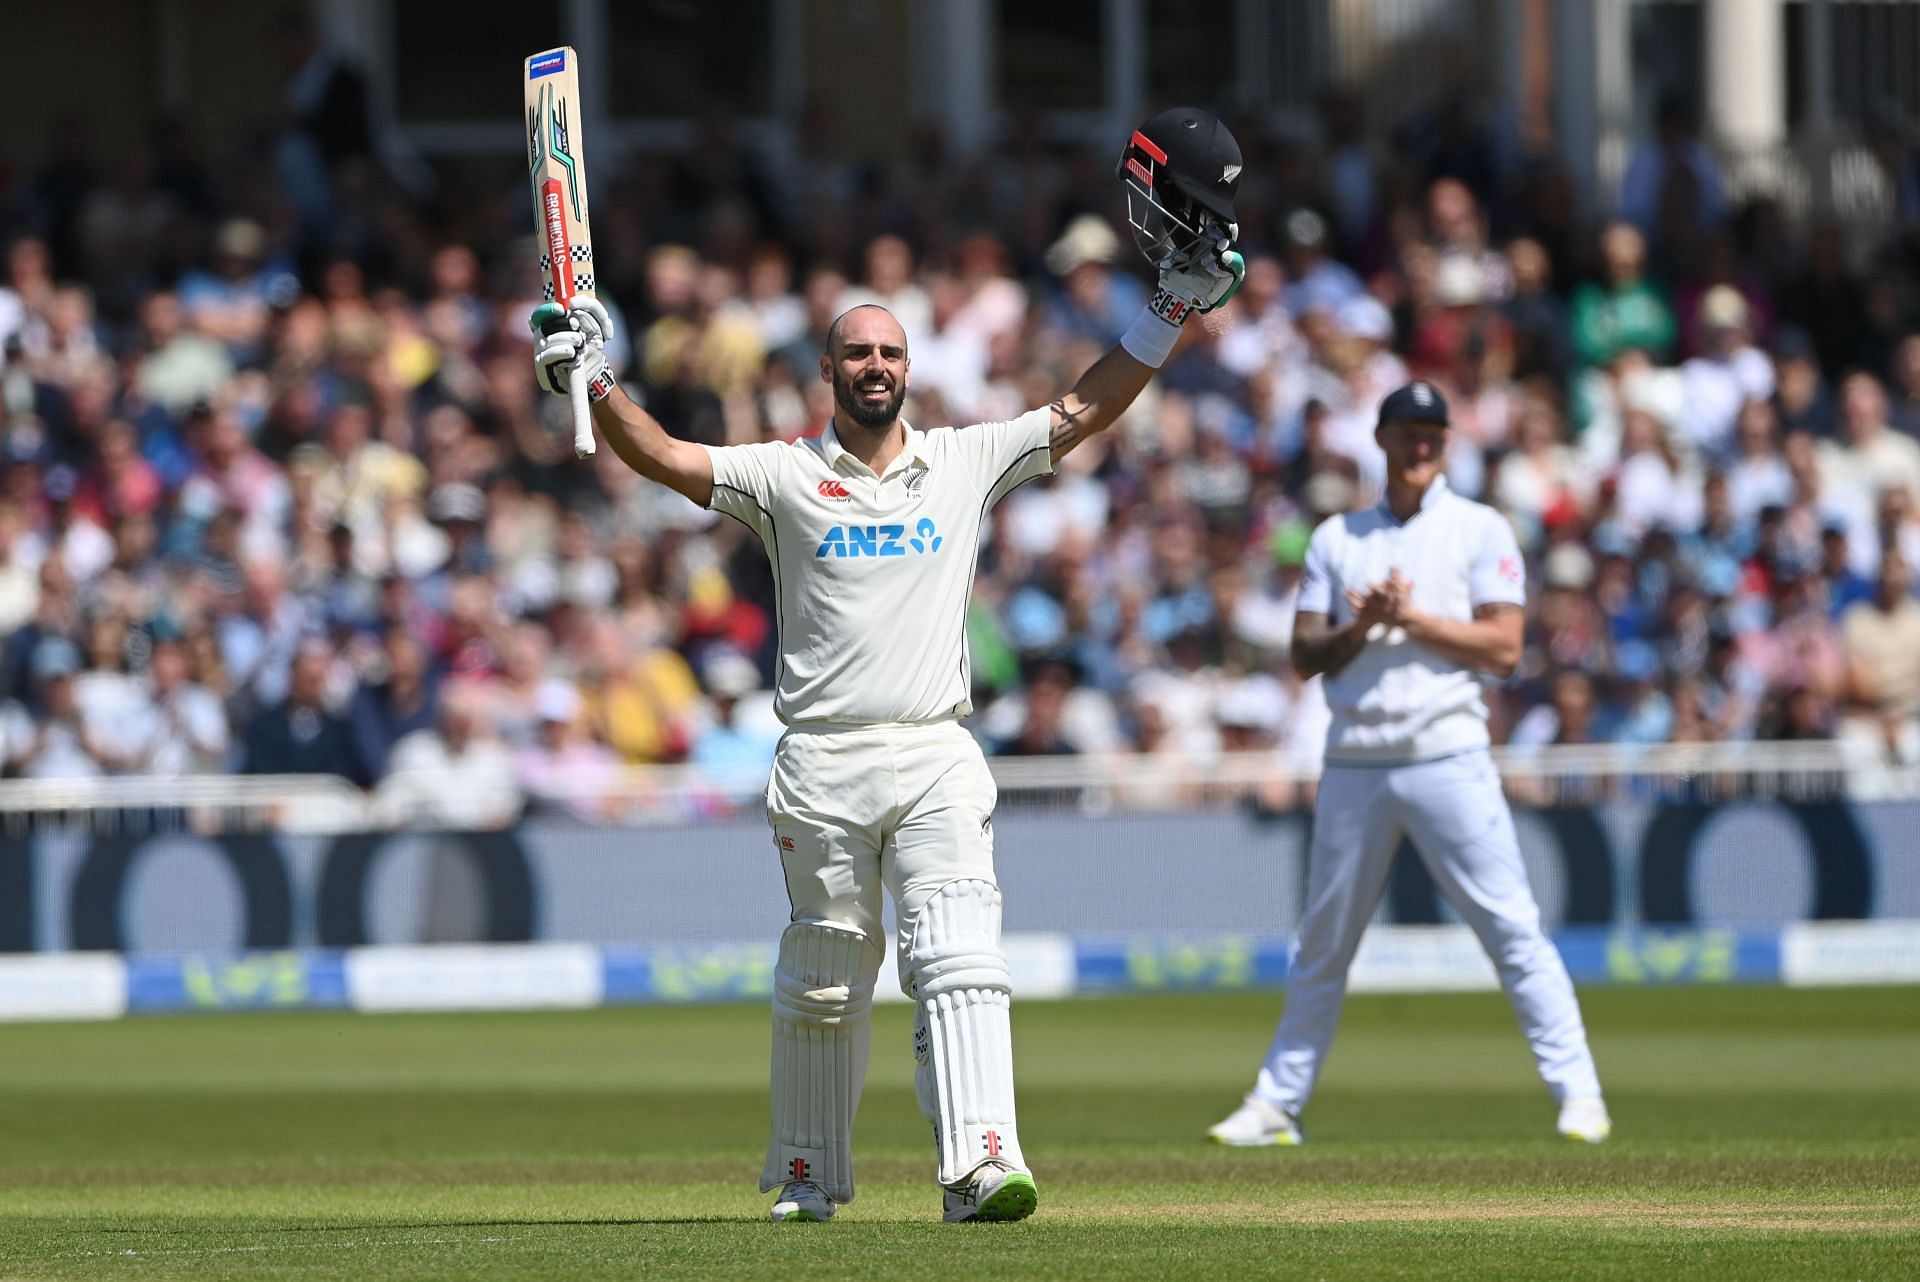 England v New Zealand - Second LV= Insurance Test Match: Day Two